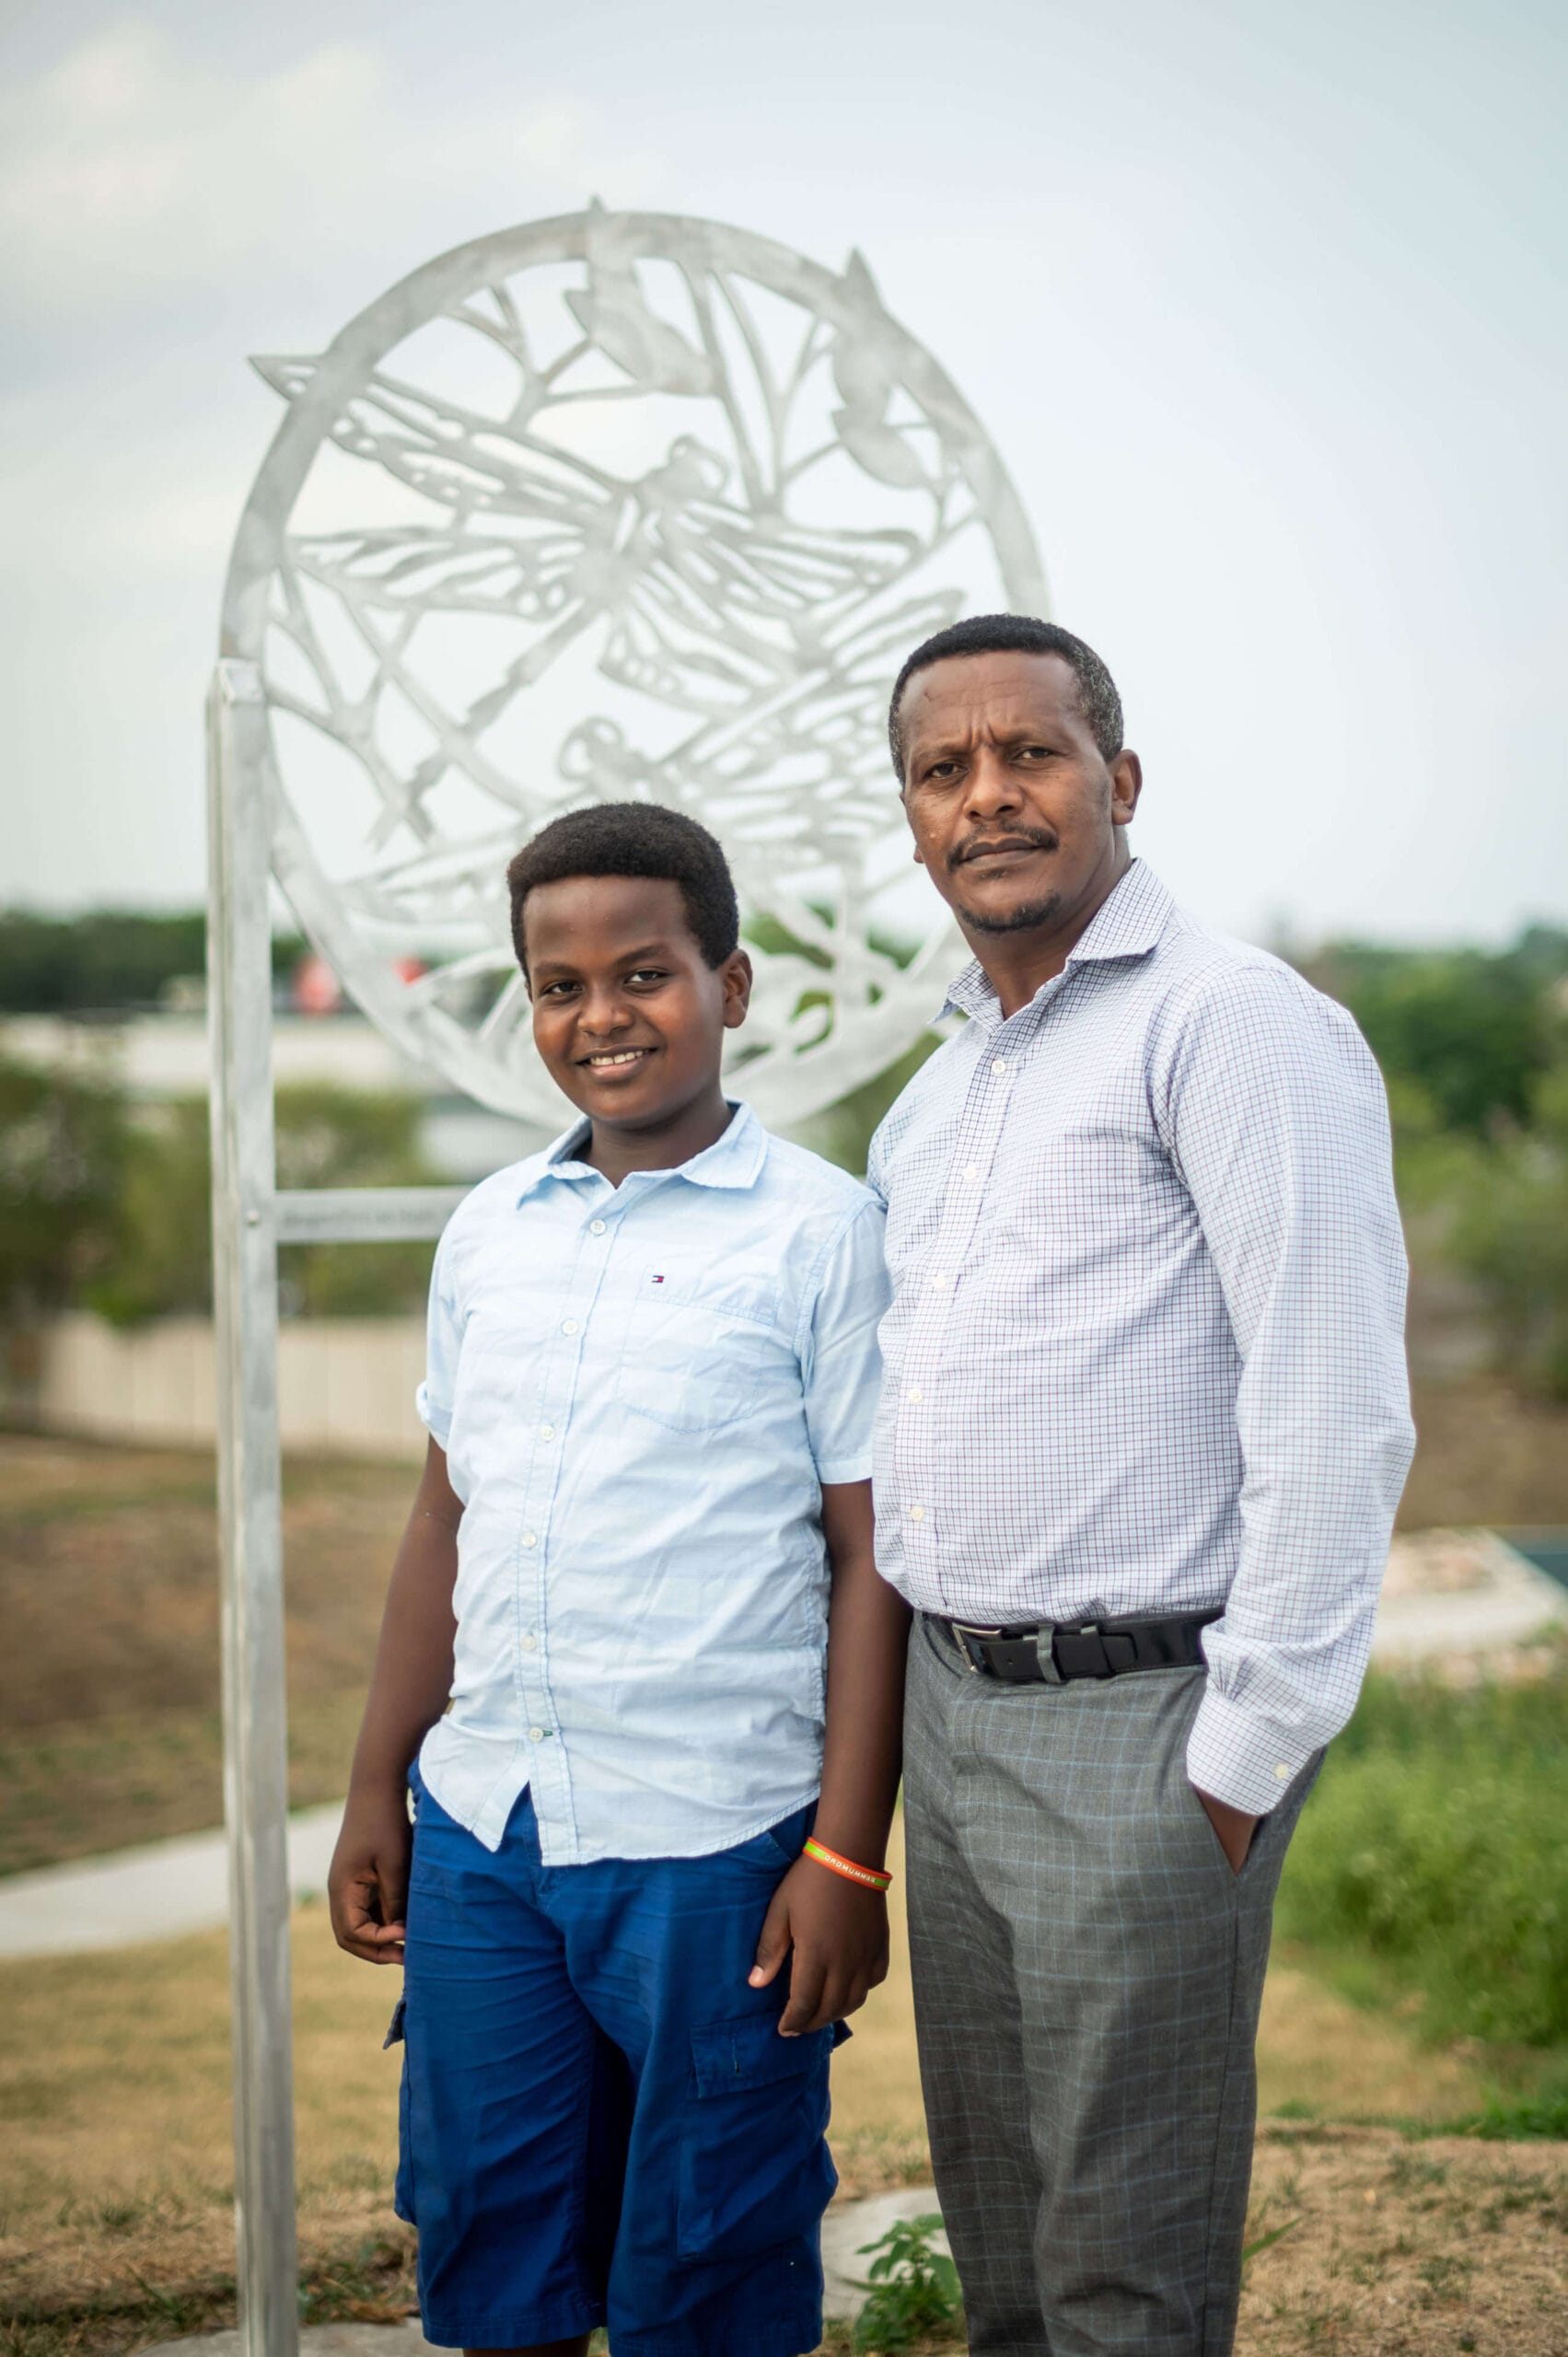 A father and son standing in front of a metal sculpture.